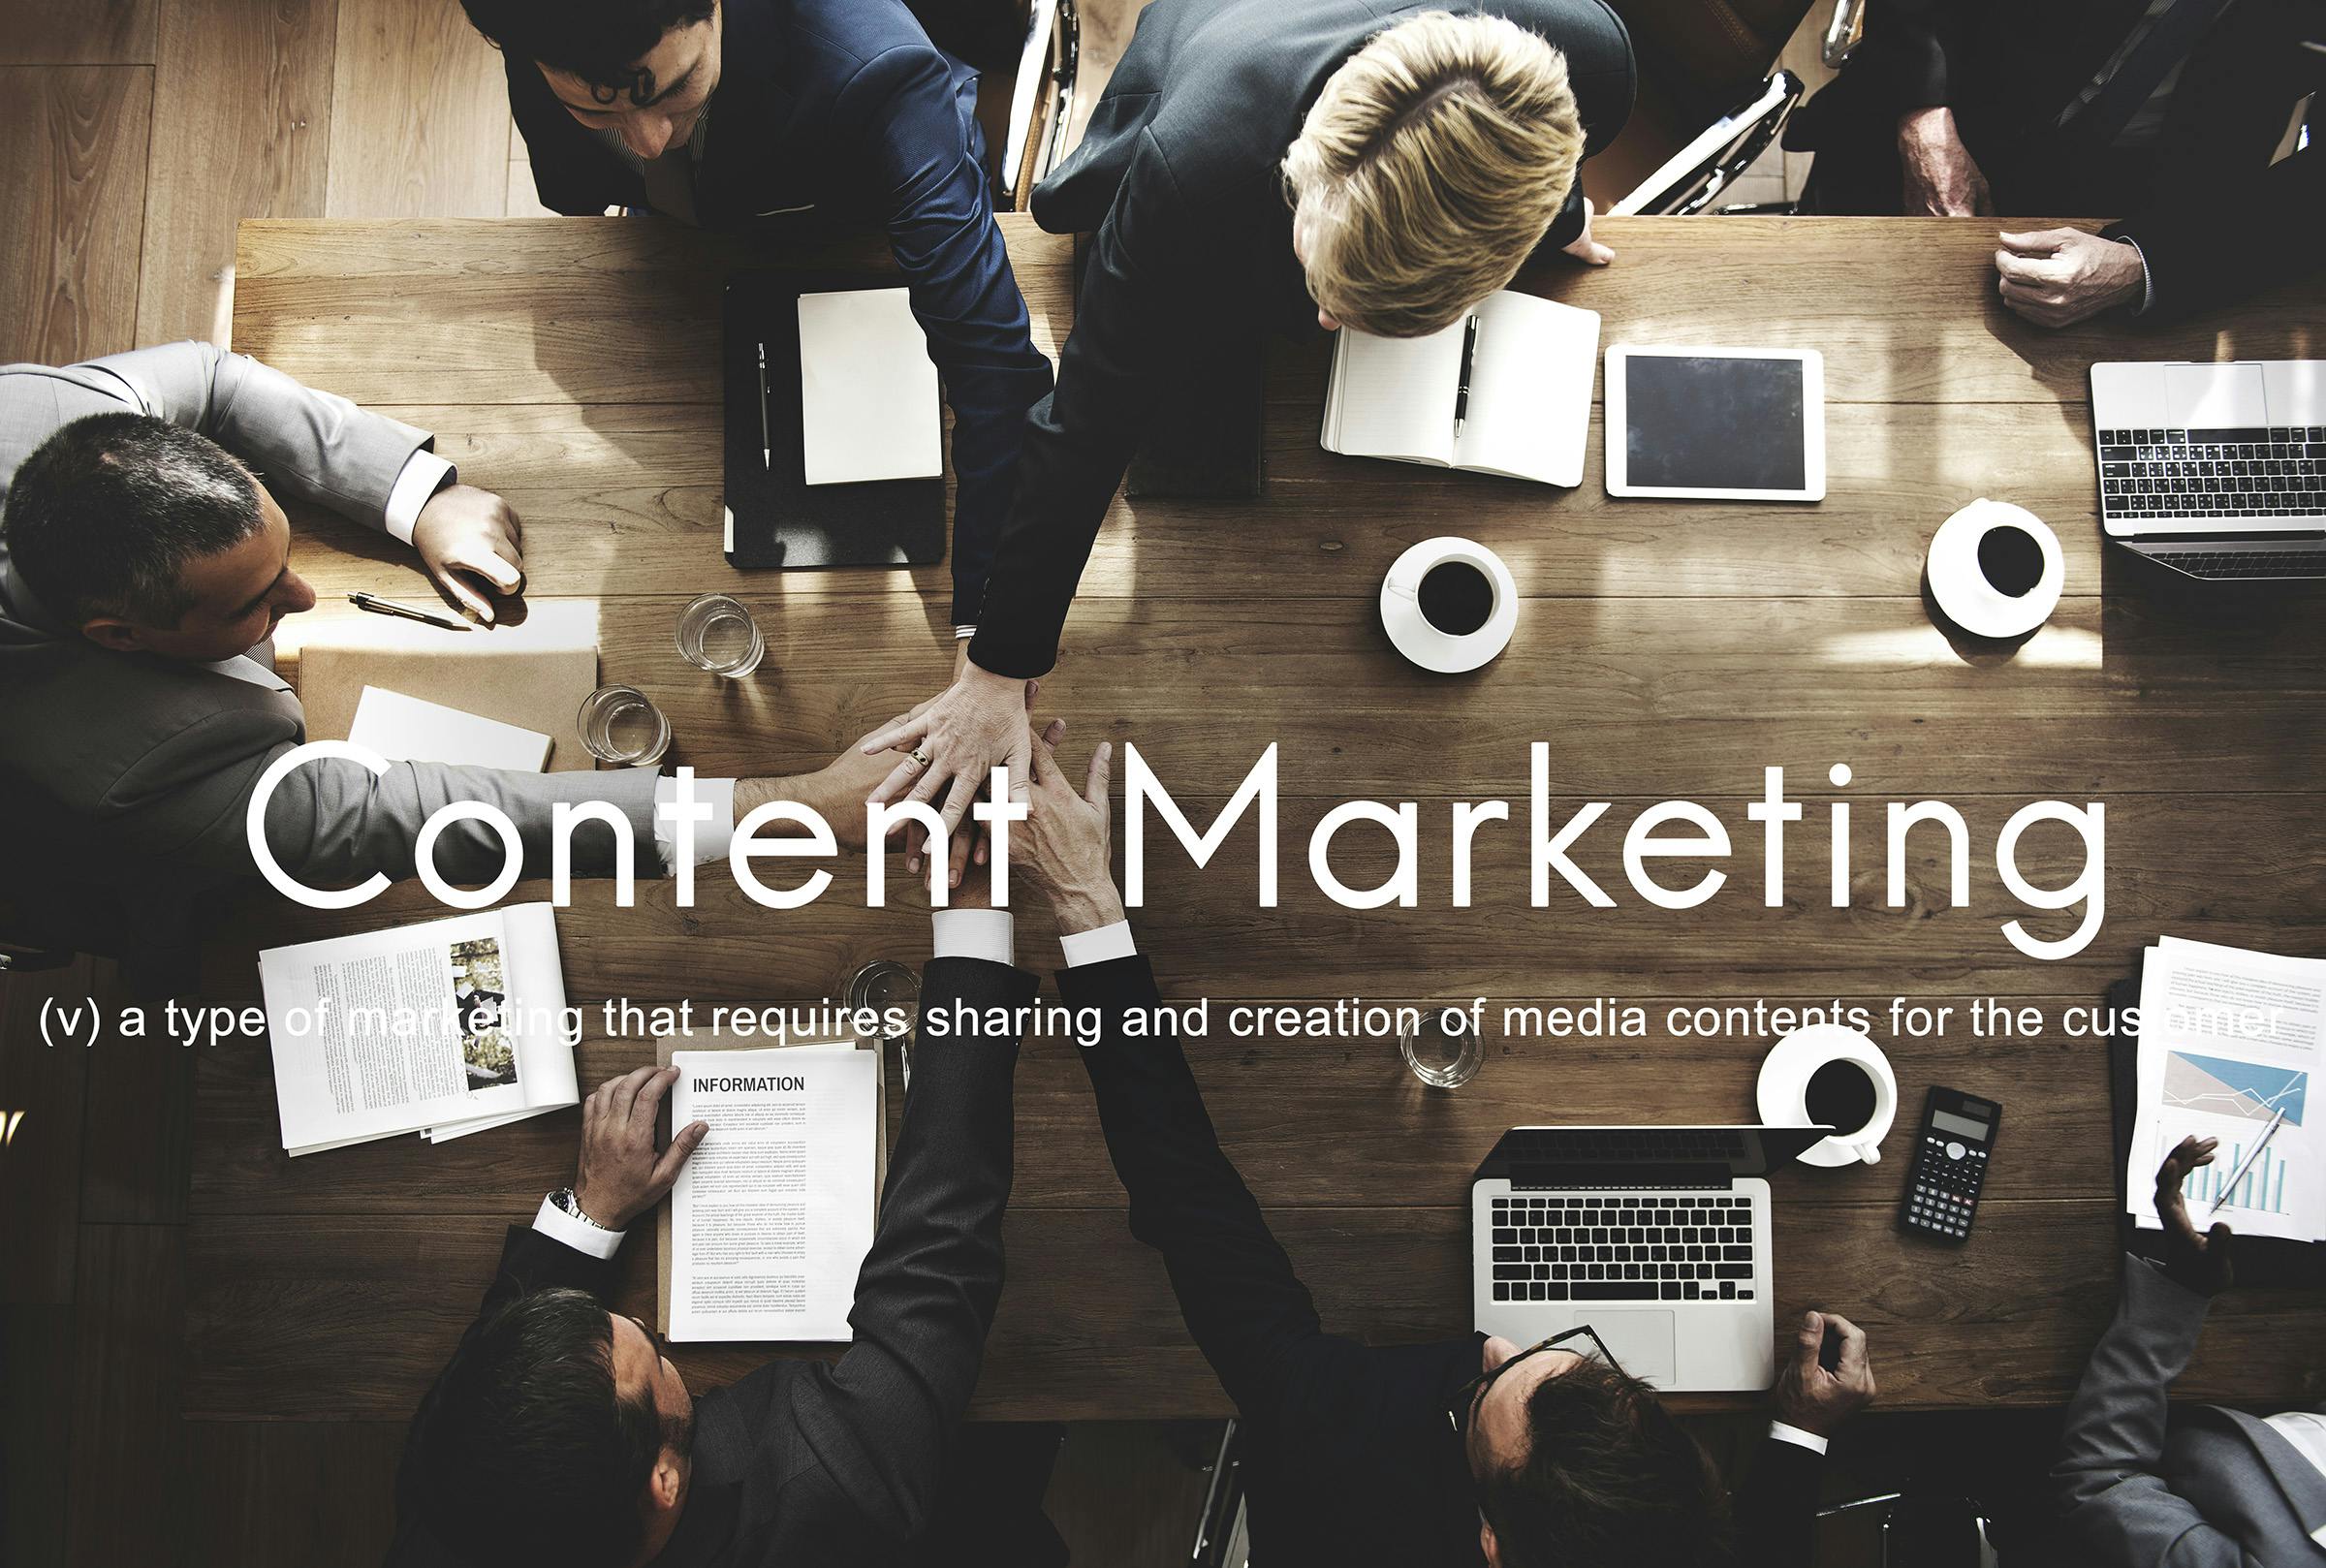 THE WHYS & HOWS OF CONTENT MARKETING